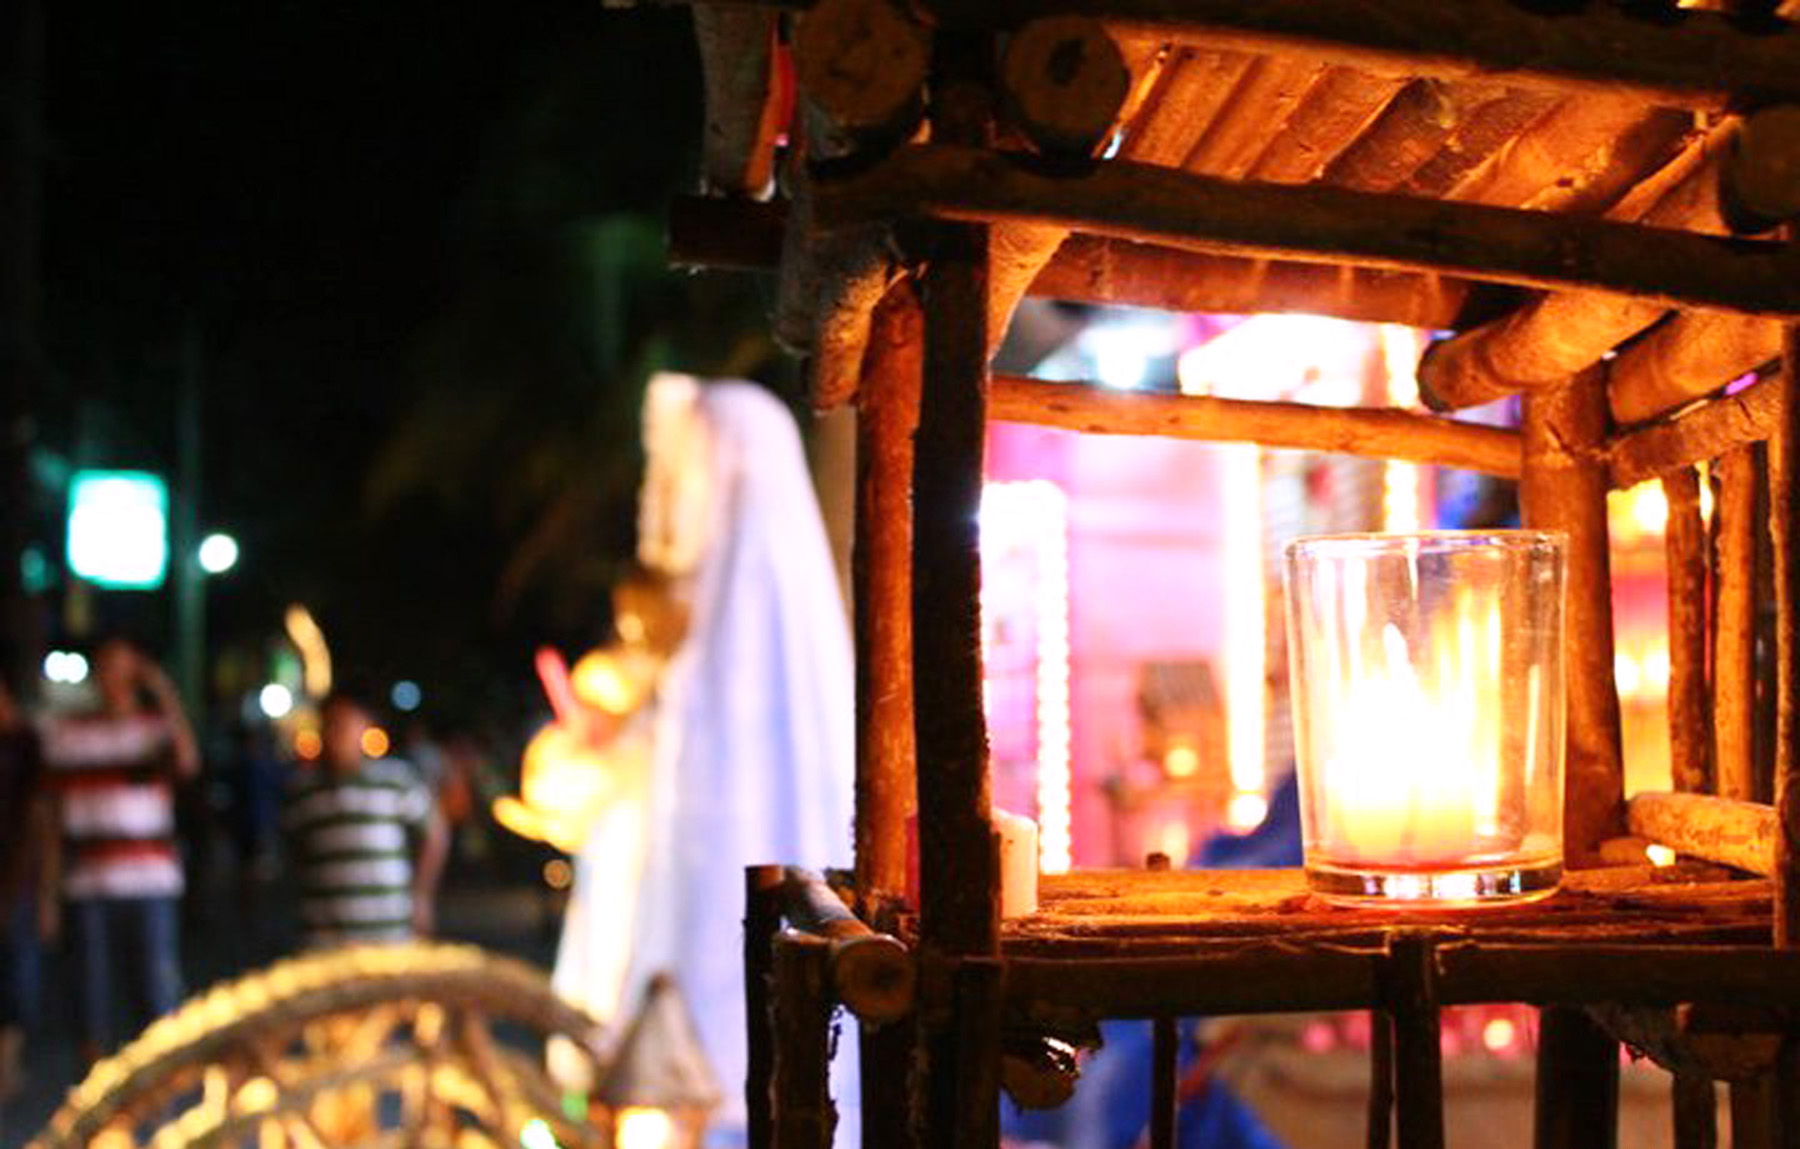 2011 Candle Festival “the true meaning of it”- Candelaria